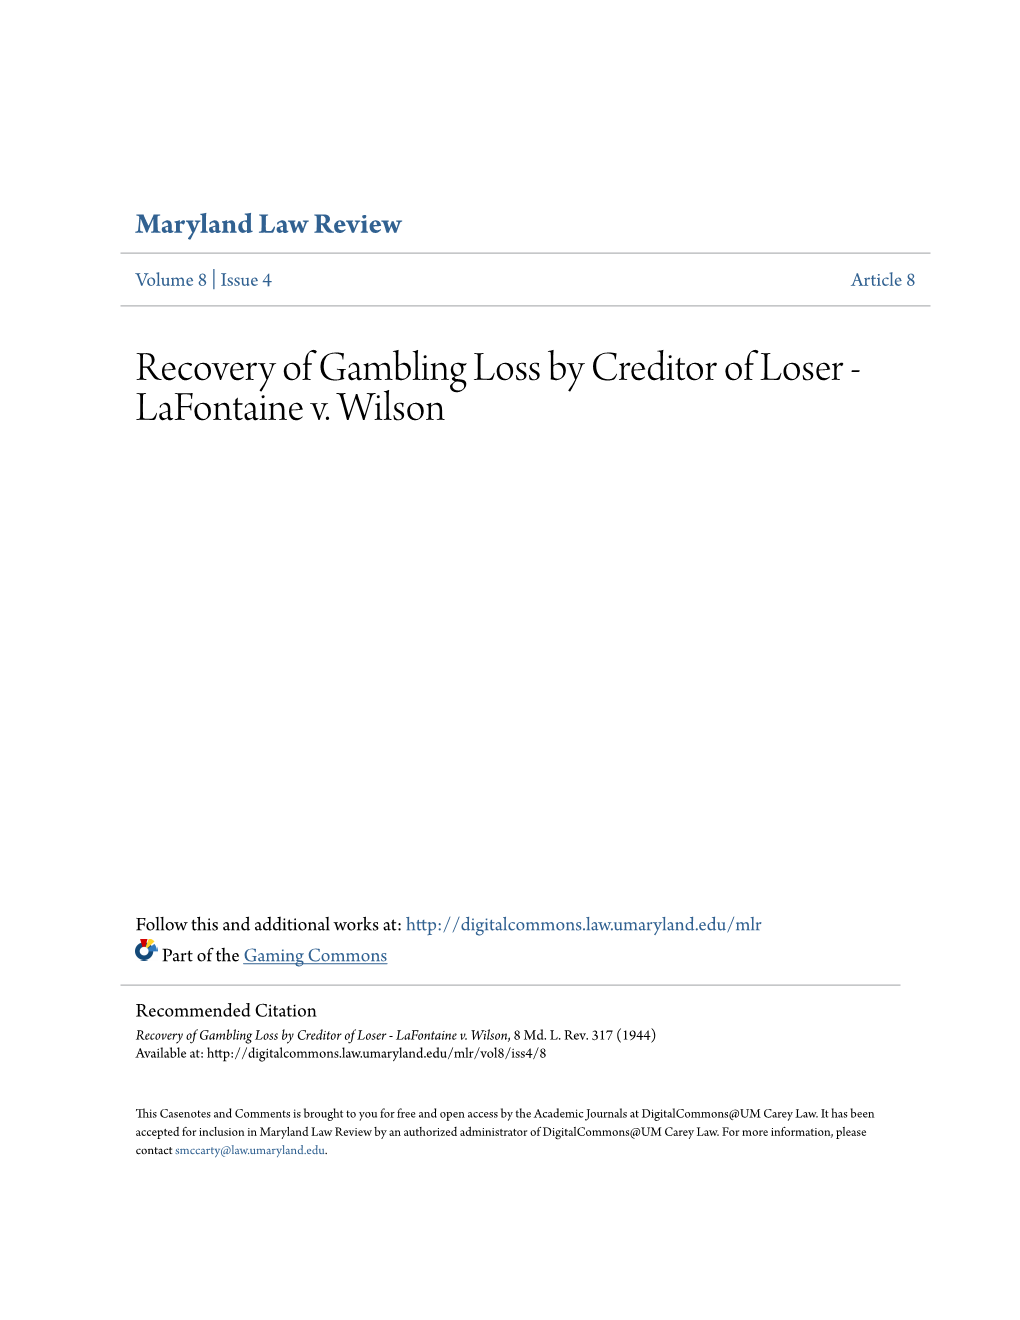 Recovery of Gambling Loss by Creditor of Loser - Lafontaine V